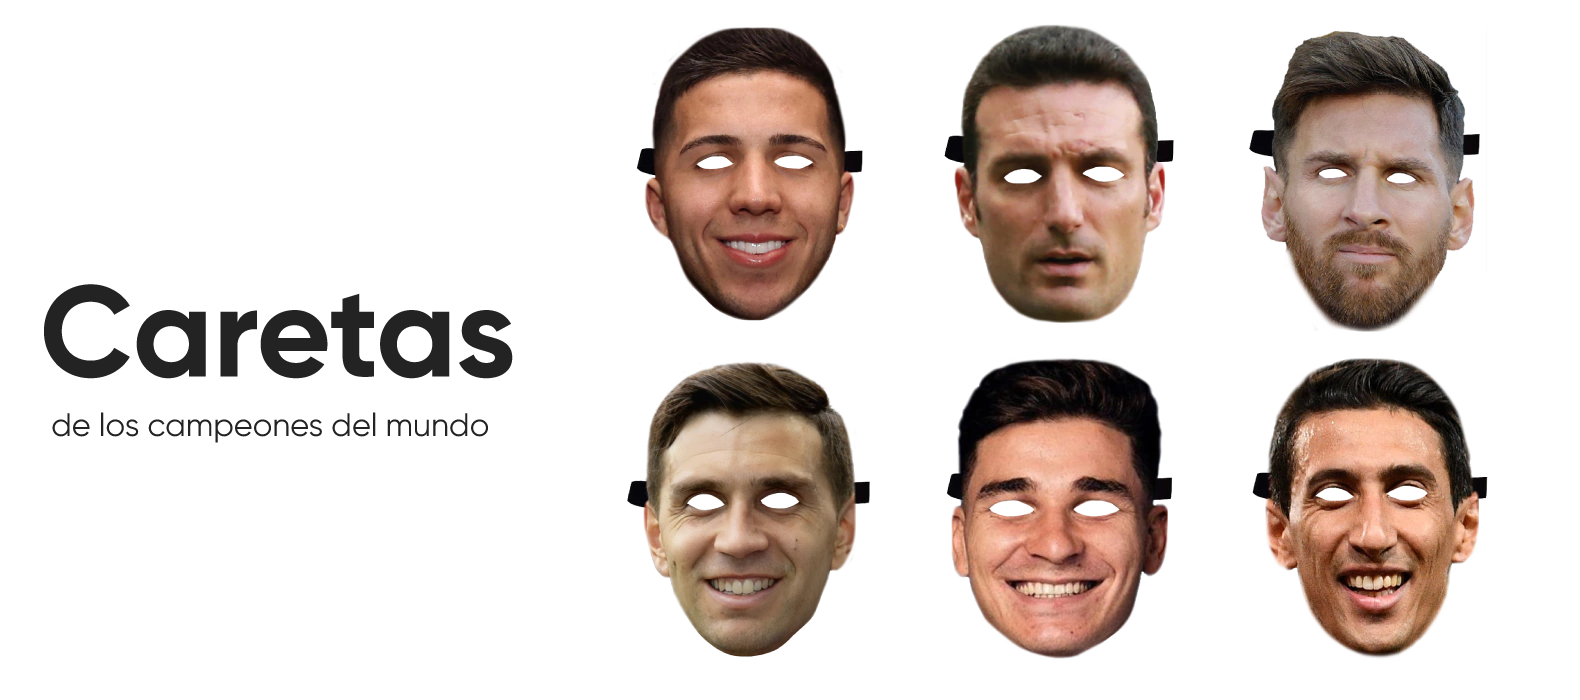 An image of six masks based on the faces of Argentina's national football team